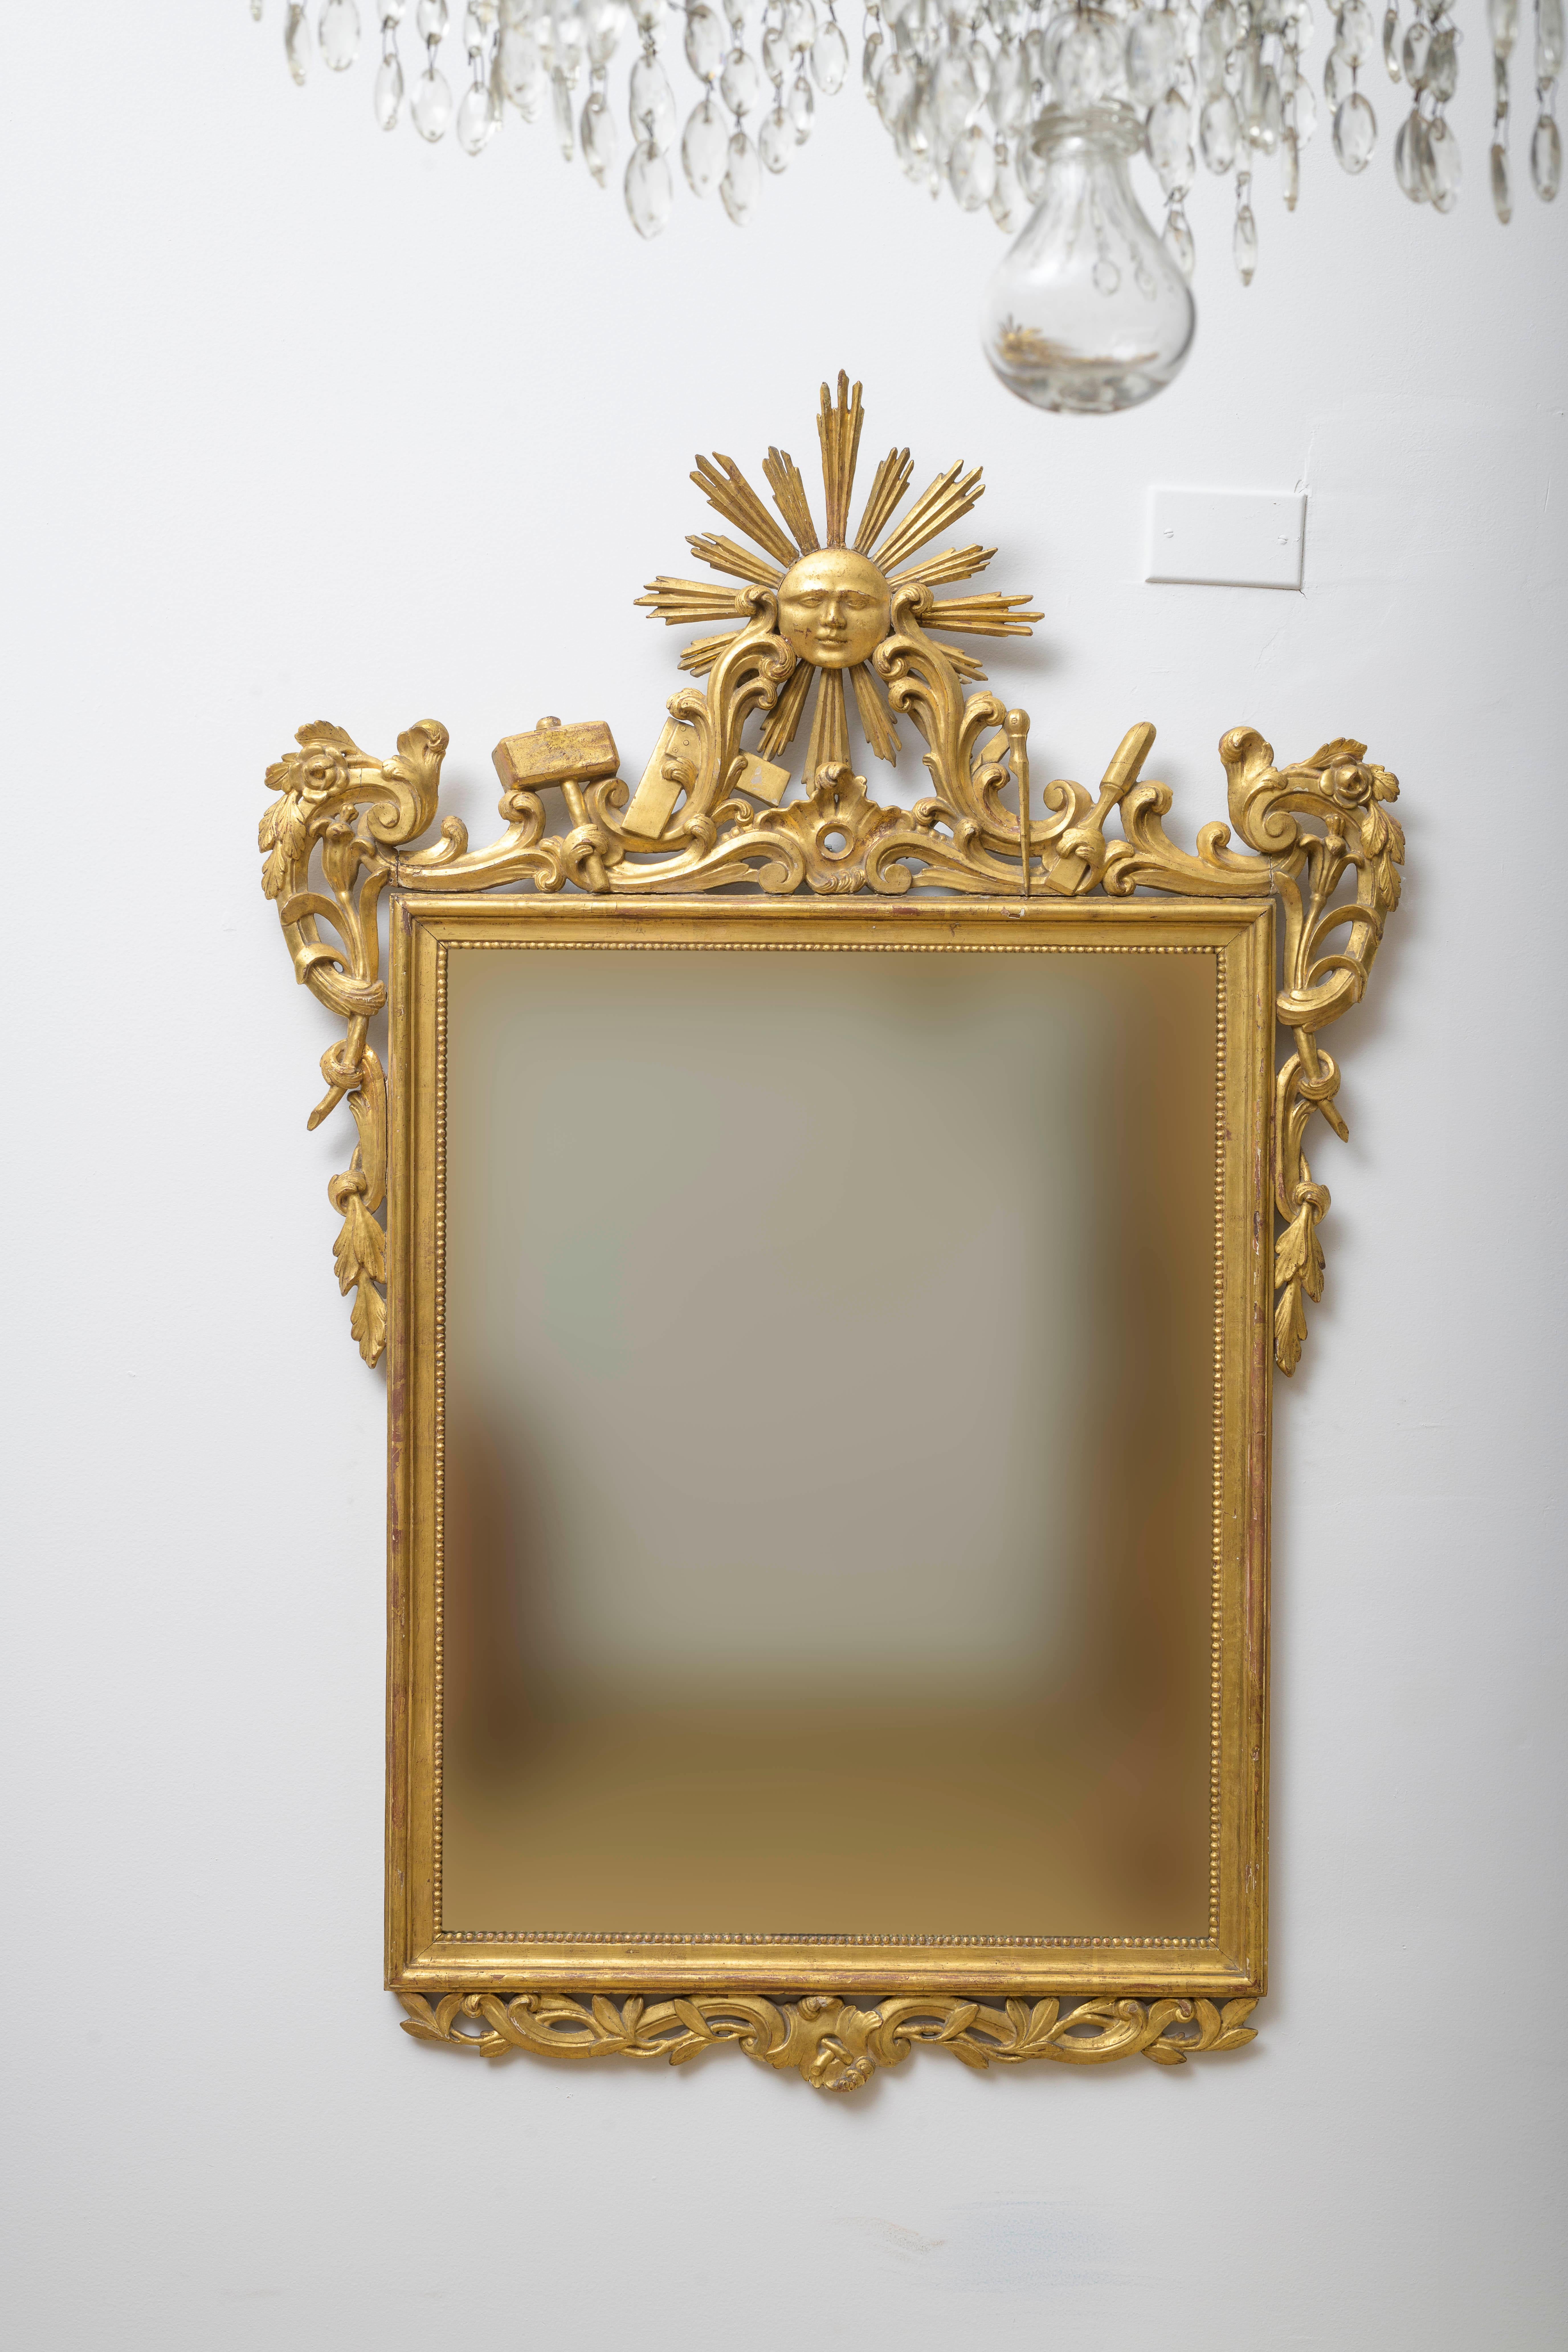 Mid 18th c mirror with freemason symbols, Louis XV, Pierced wood, finely carved showing masons tools and with Sun God central cartouche, Freemason symbols, leaves and decorative frieze, and gilt. Mirror glass, not original, but from the 19th c 